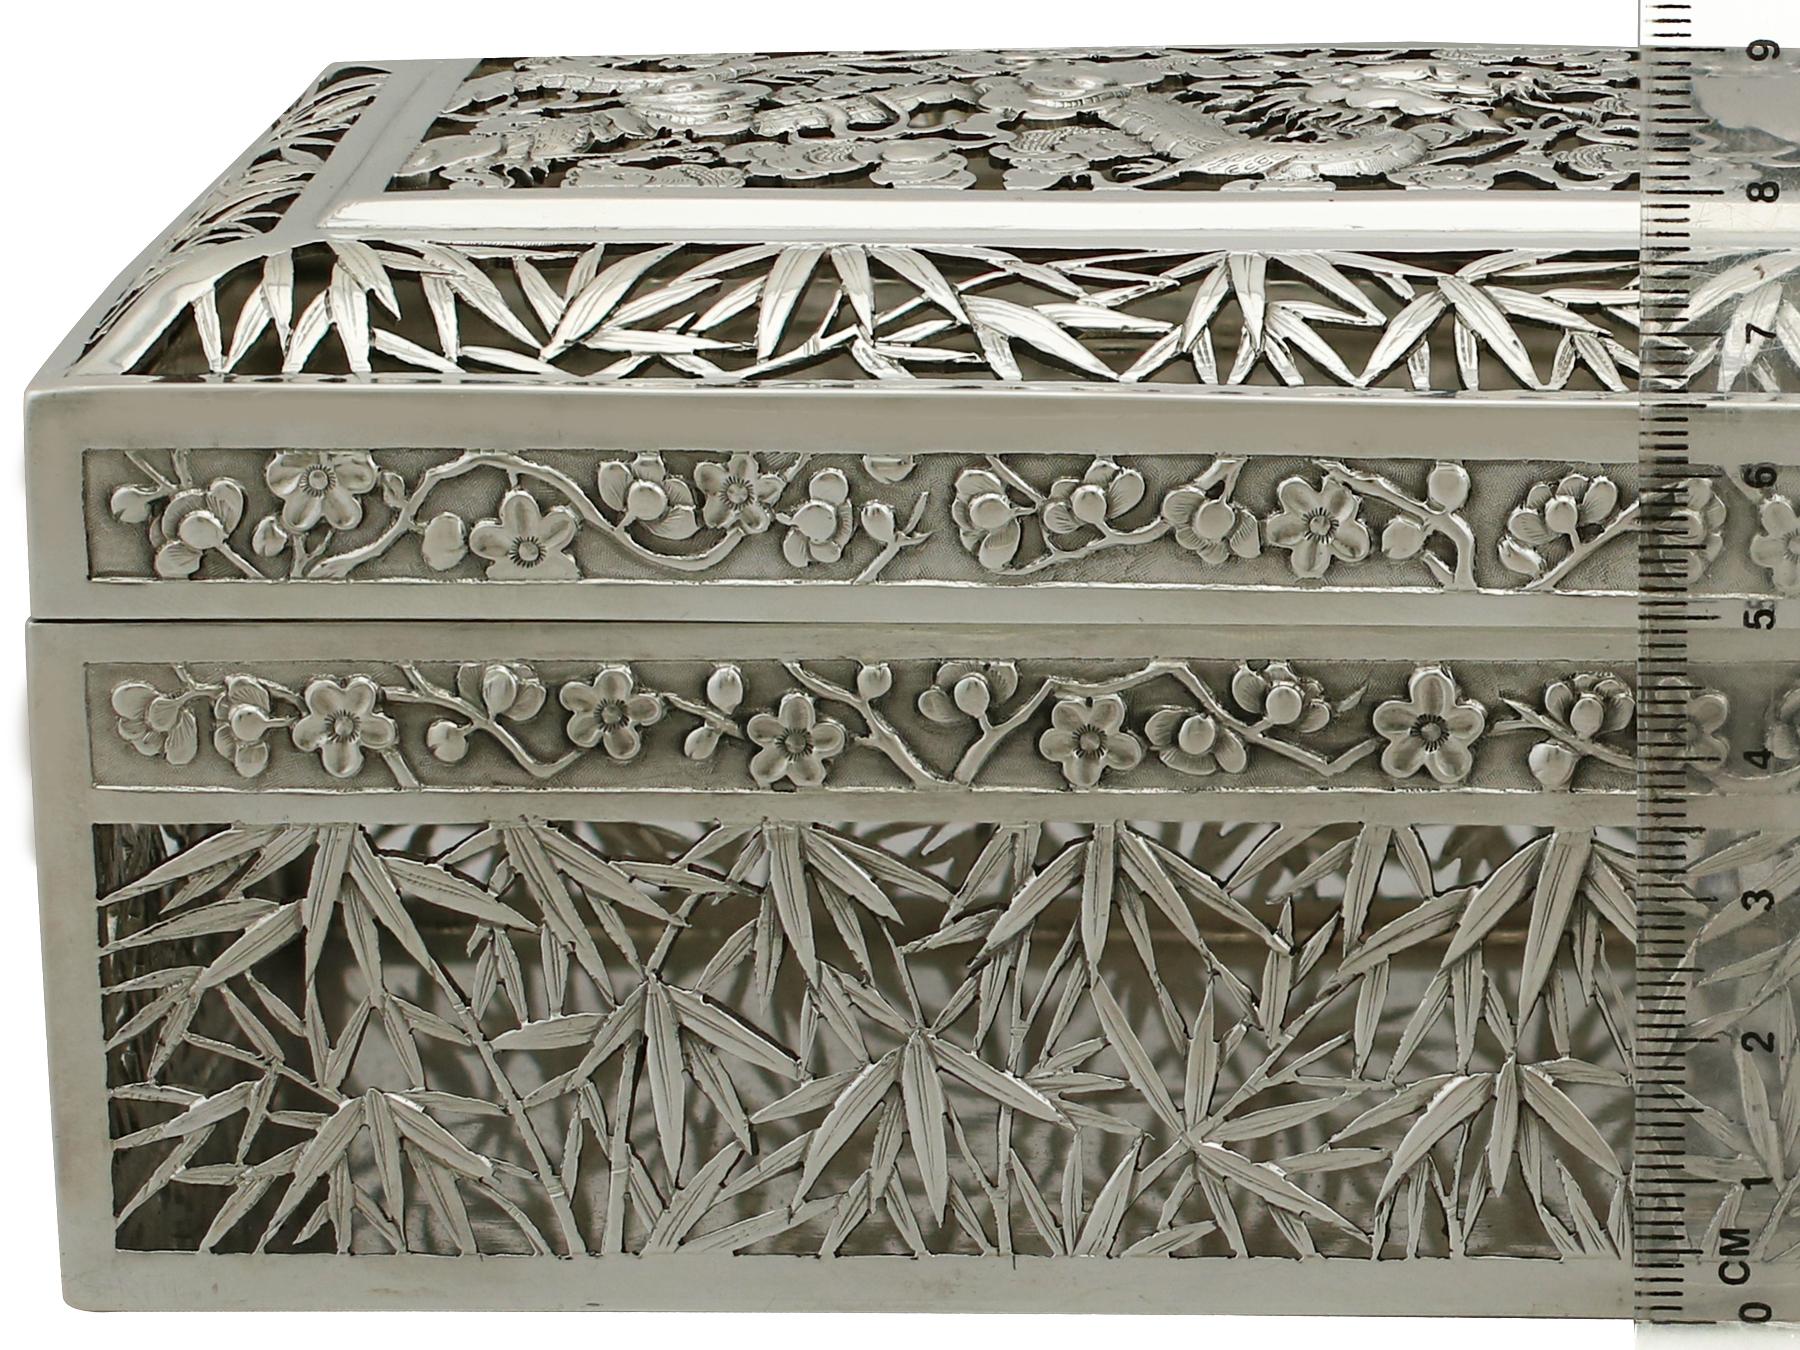 Late 19th Century 1890s Antique Chinese Export Silver Box by Wang Hing & Co